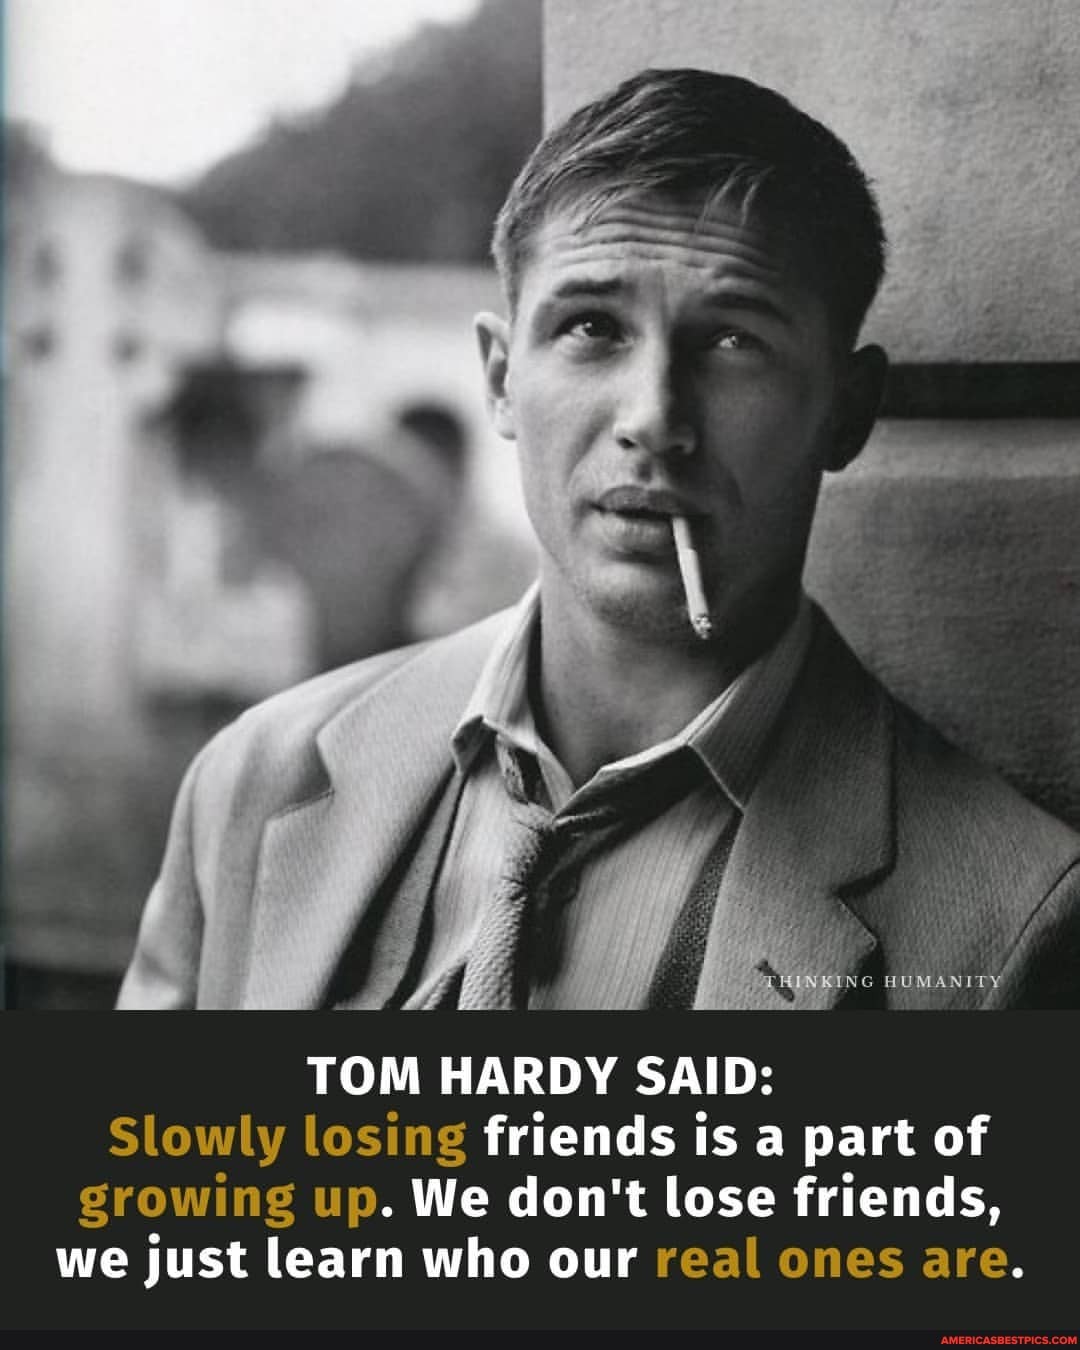 HUMANITY TOM HARDY SAID: Slowly losing friends is a part of growing up ...